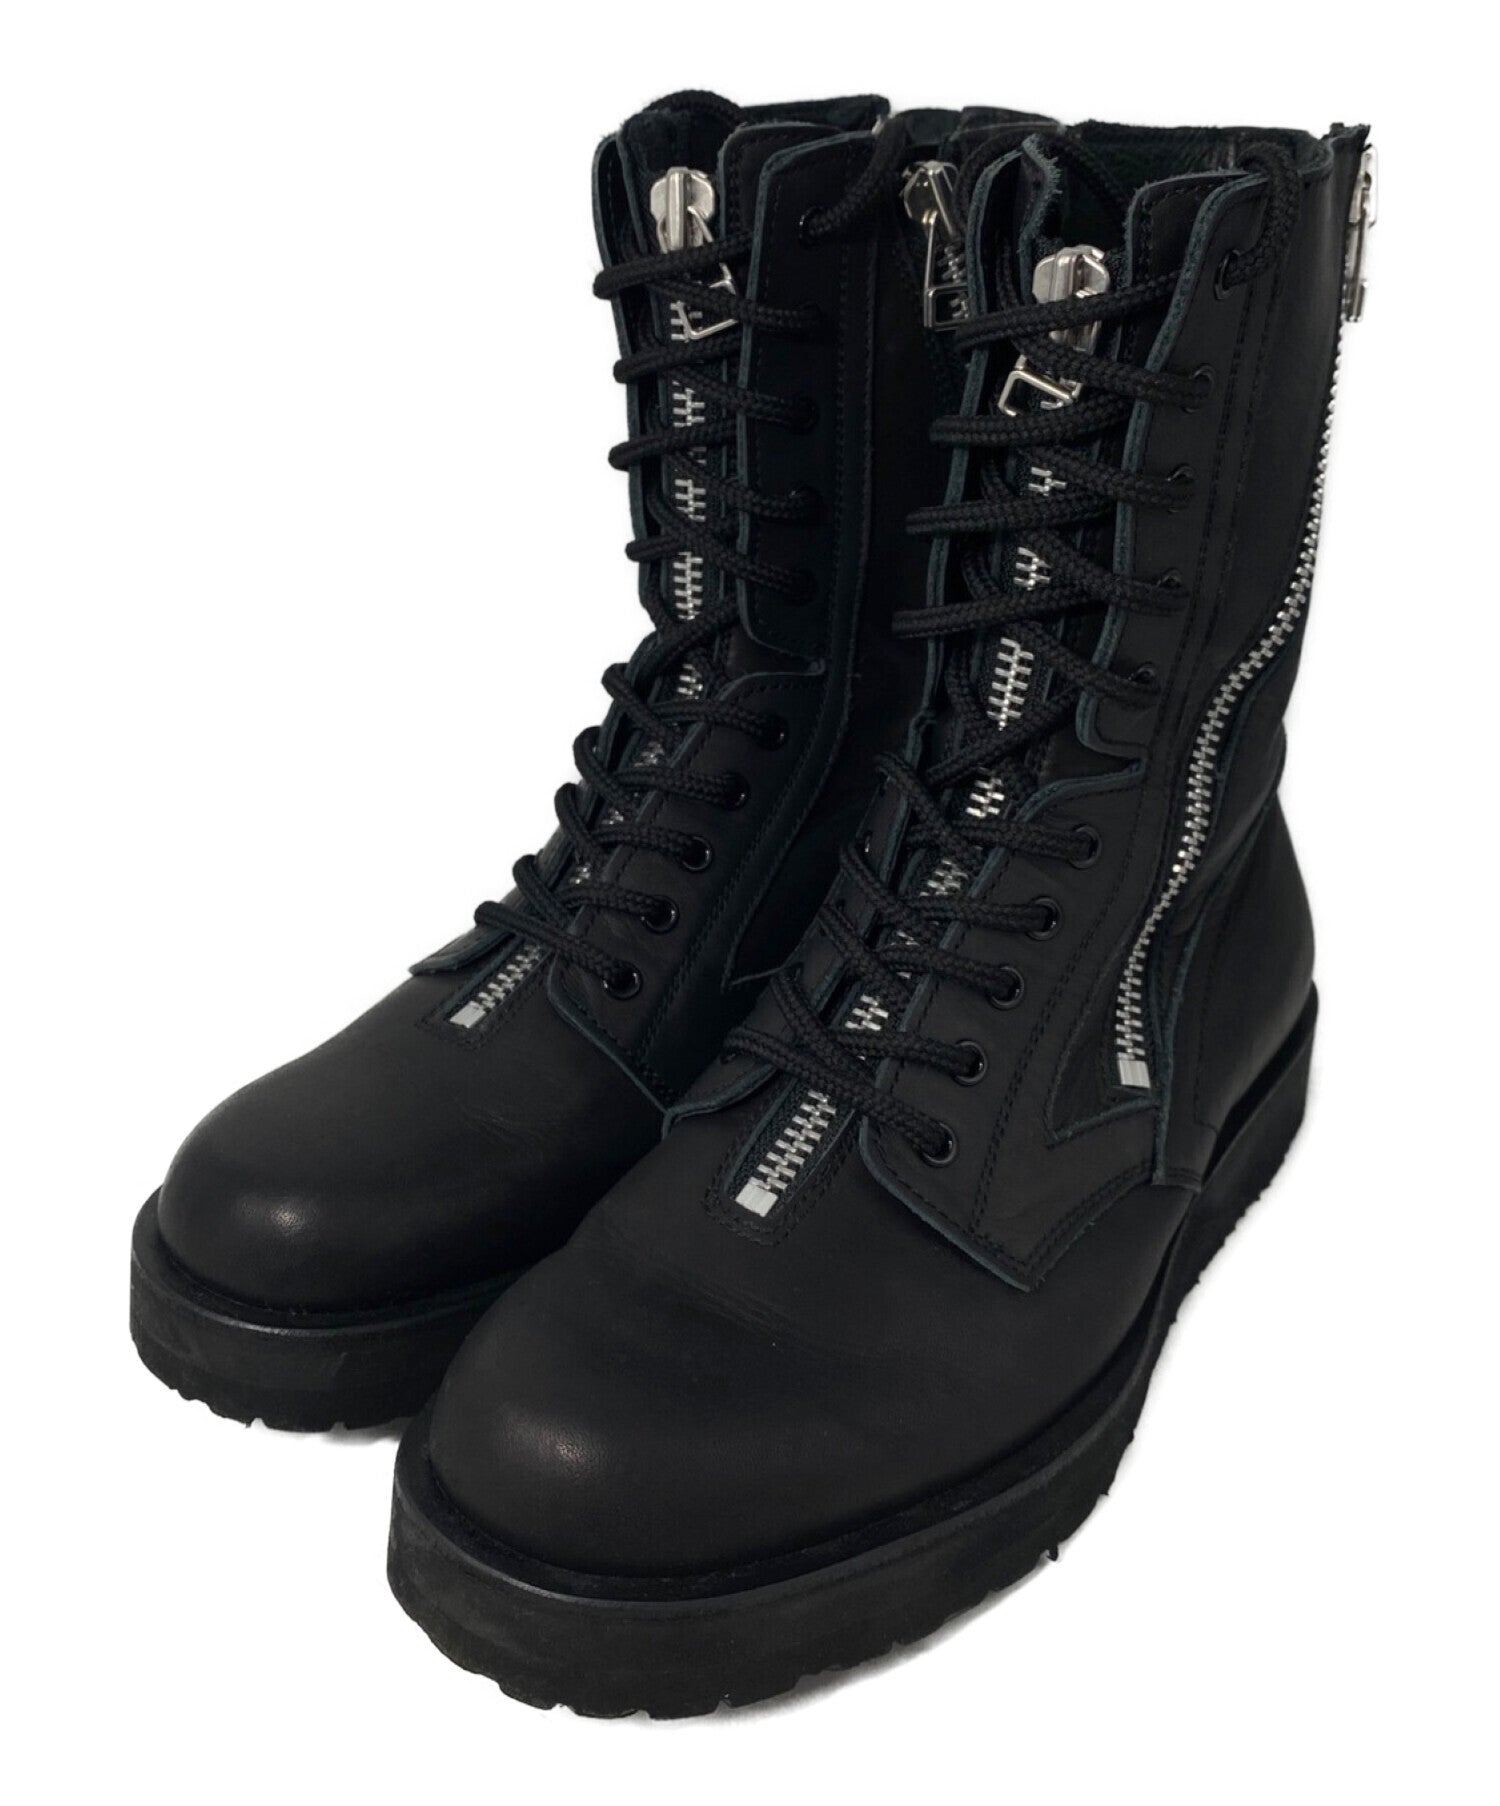 From the Archives: Combat Boots Through the Years